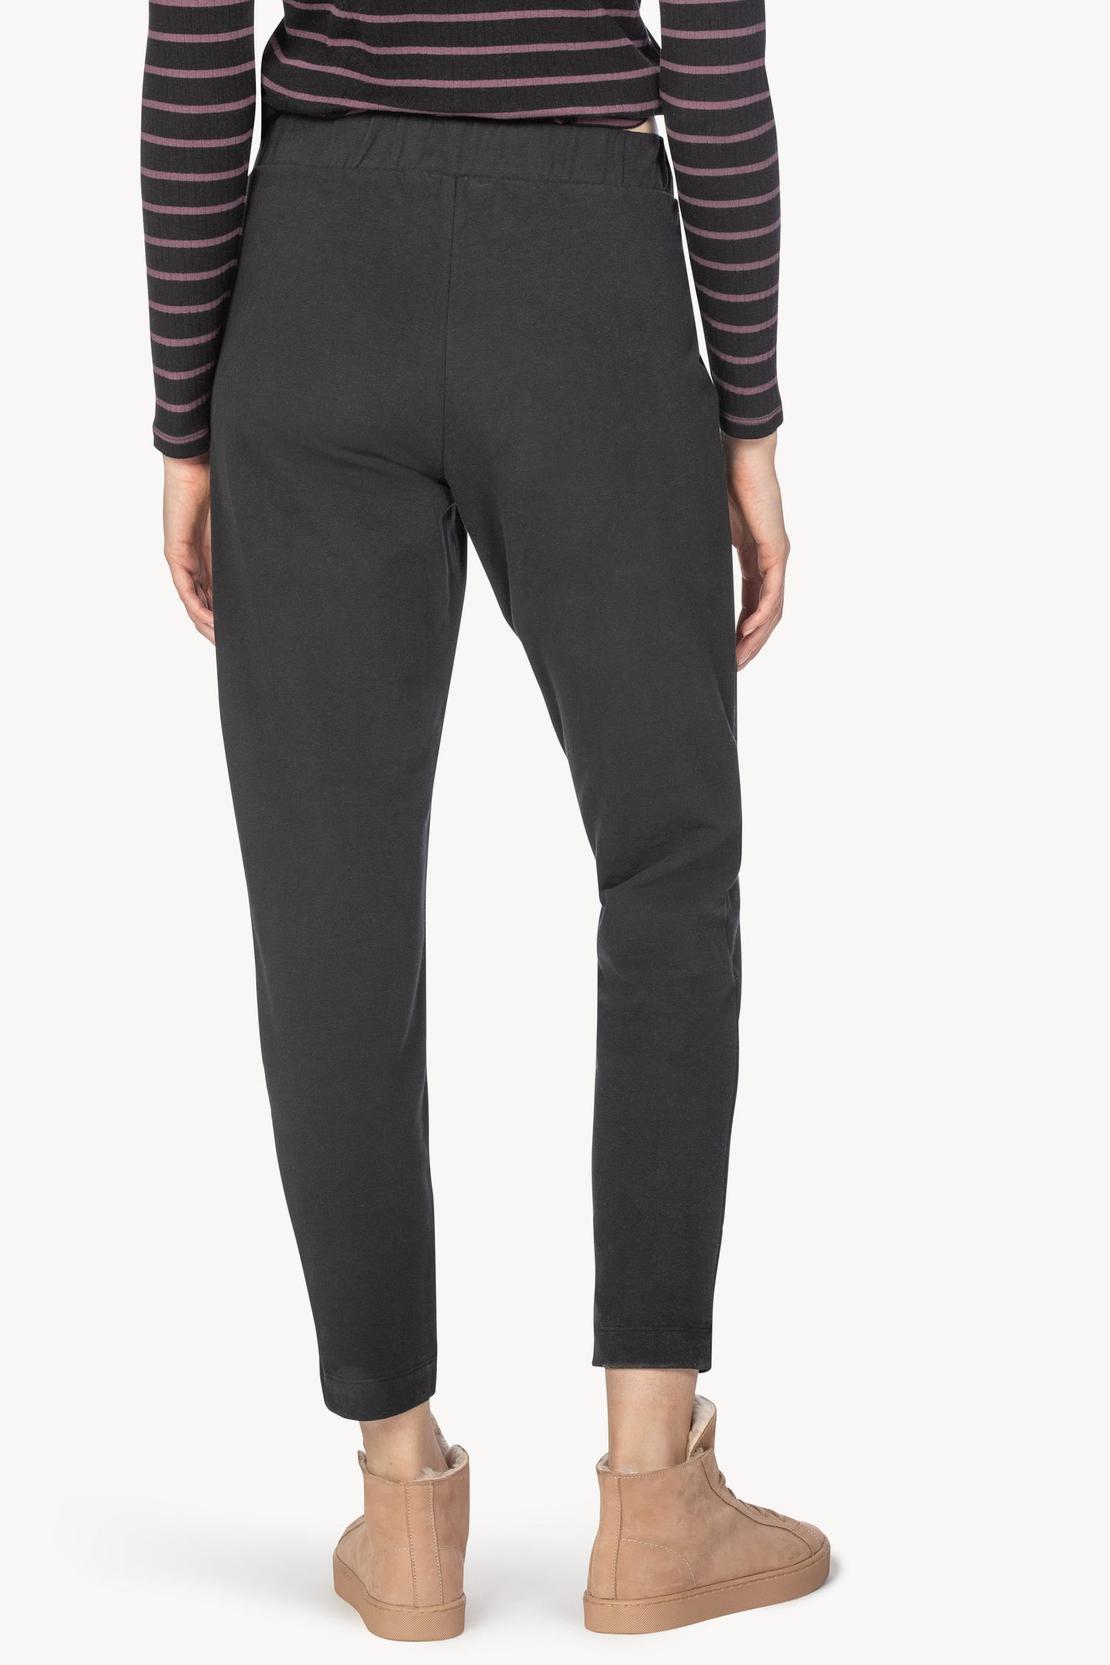 Terry Pant in Black